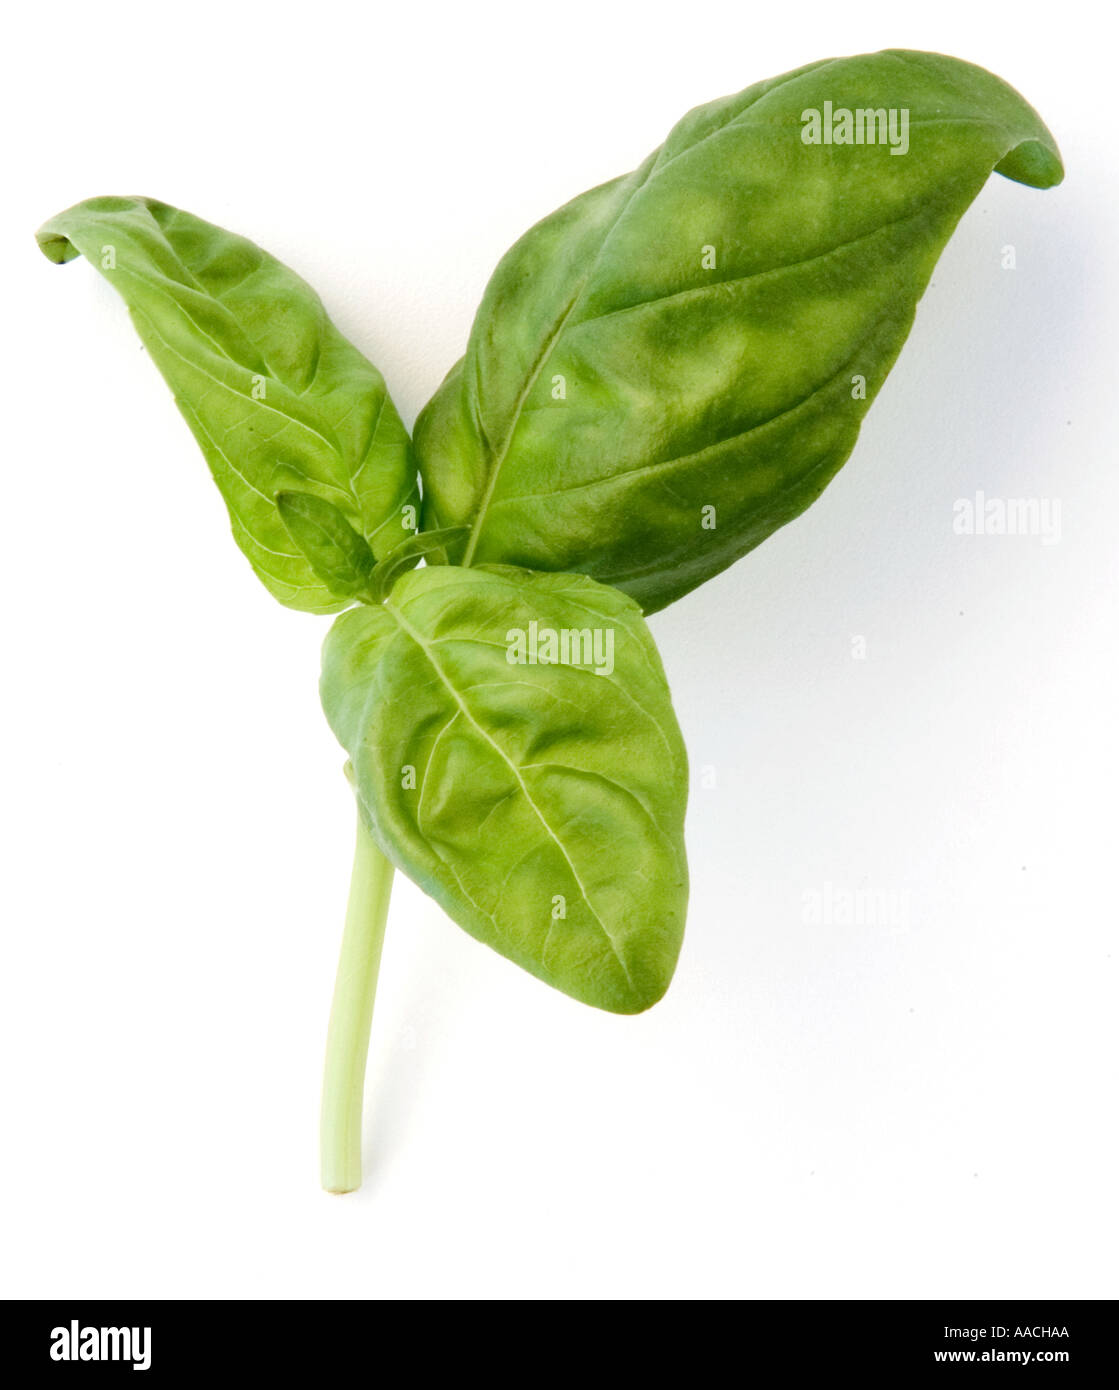 Sprig of fresh Sweet Basil. Three bright, green, crinkly, leaves on a single stem. Shot on a white background, ready to cut out if needed. Stock Photo